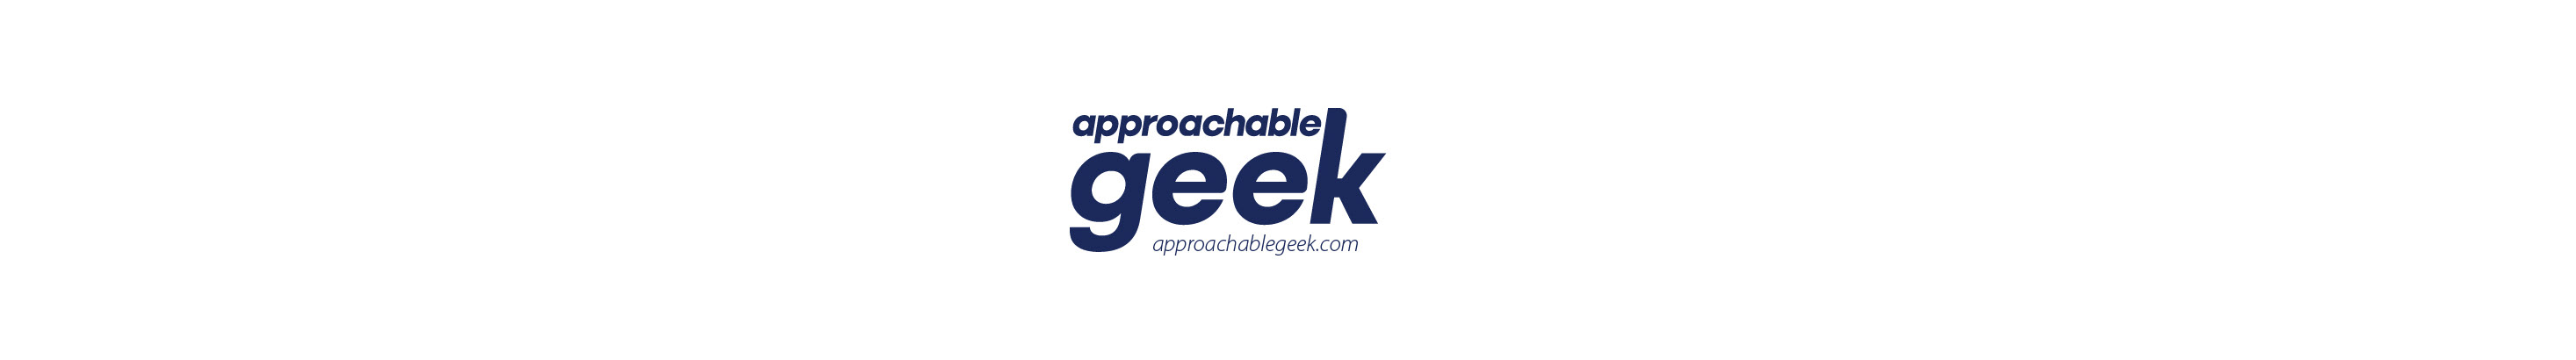 Approachable Geek's profile banner